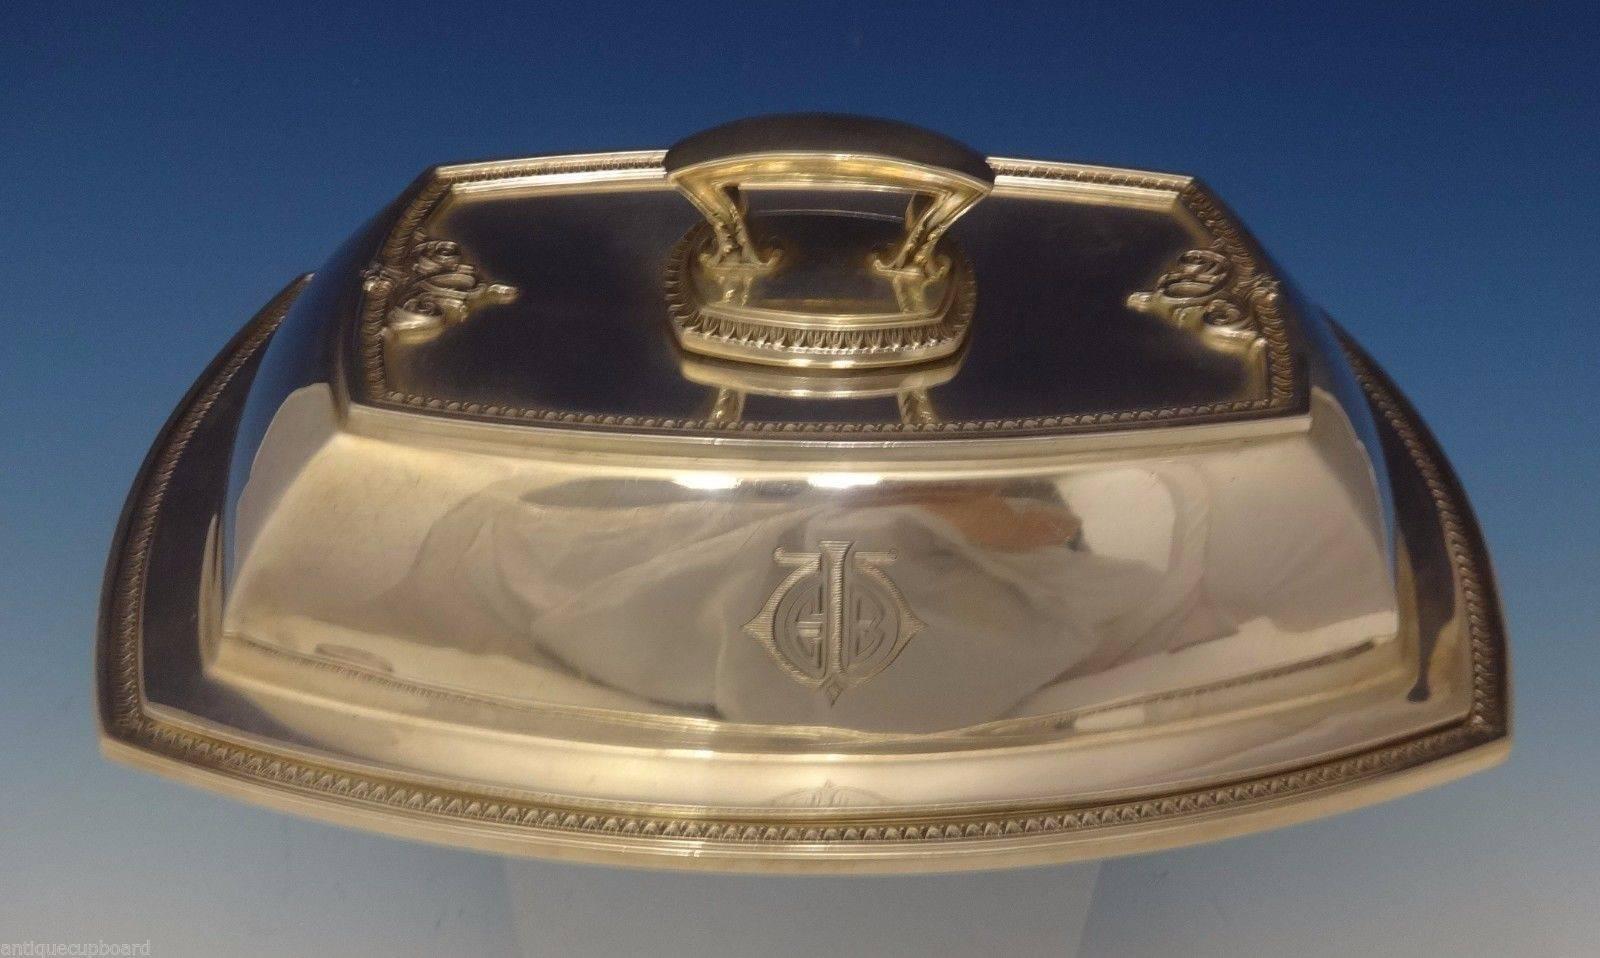 Trianon by International.

Art Deco Trianon by International sterling silver covered vegetable dish. It has a removable handle to make two bowls. The piece has an 